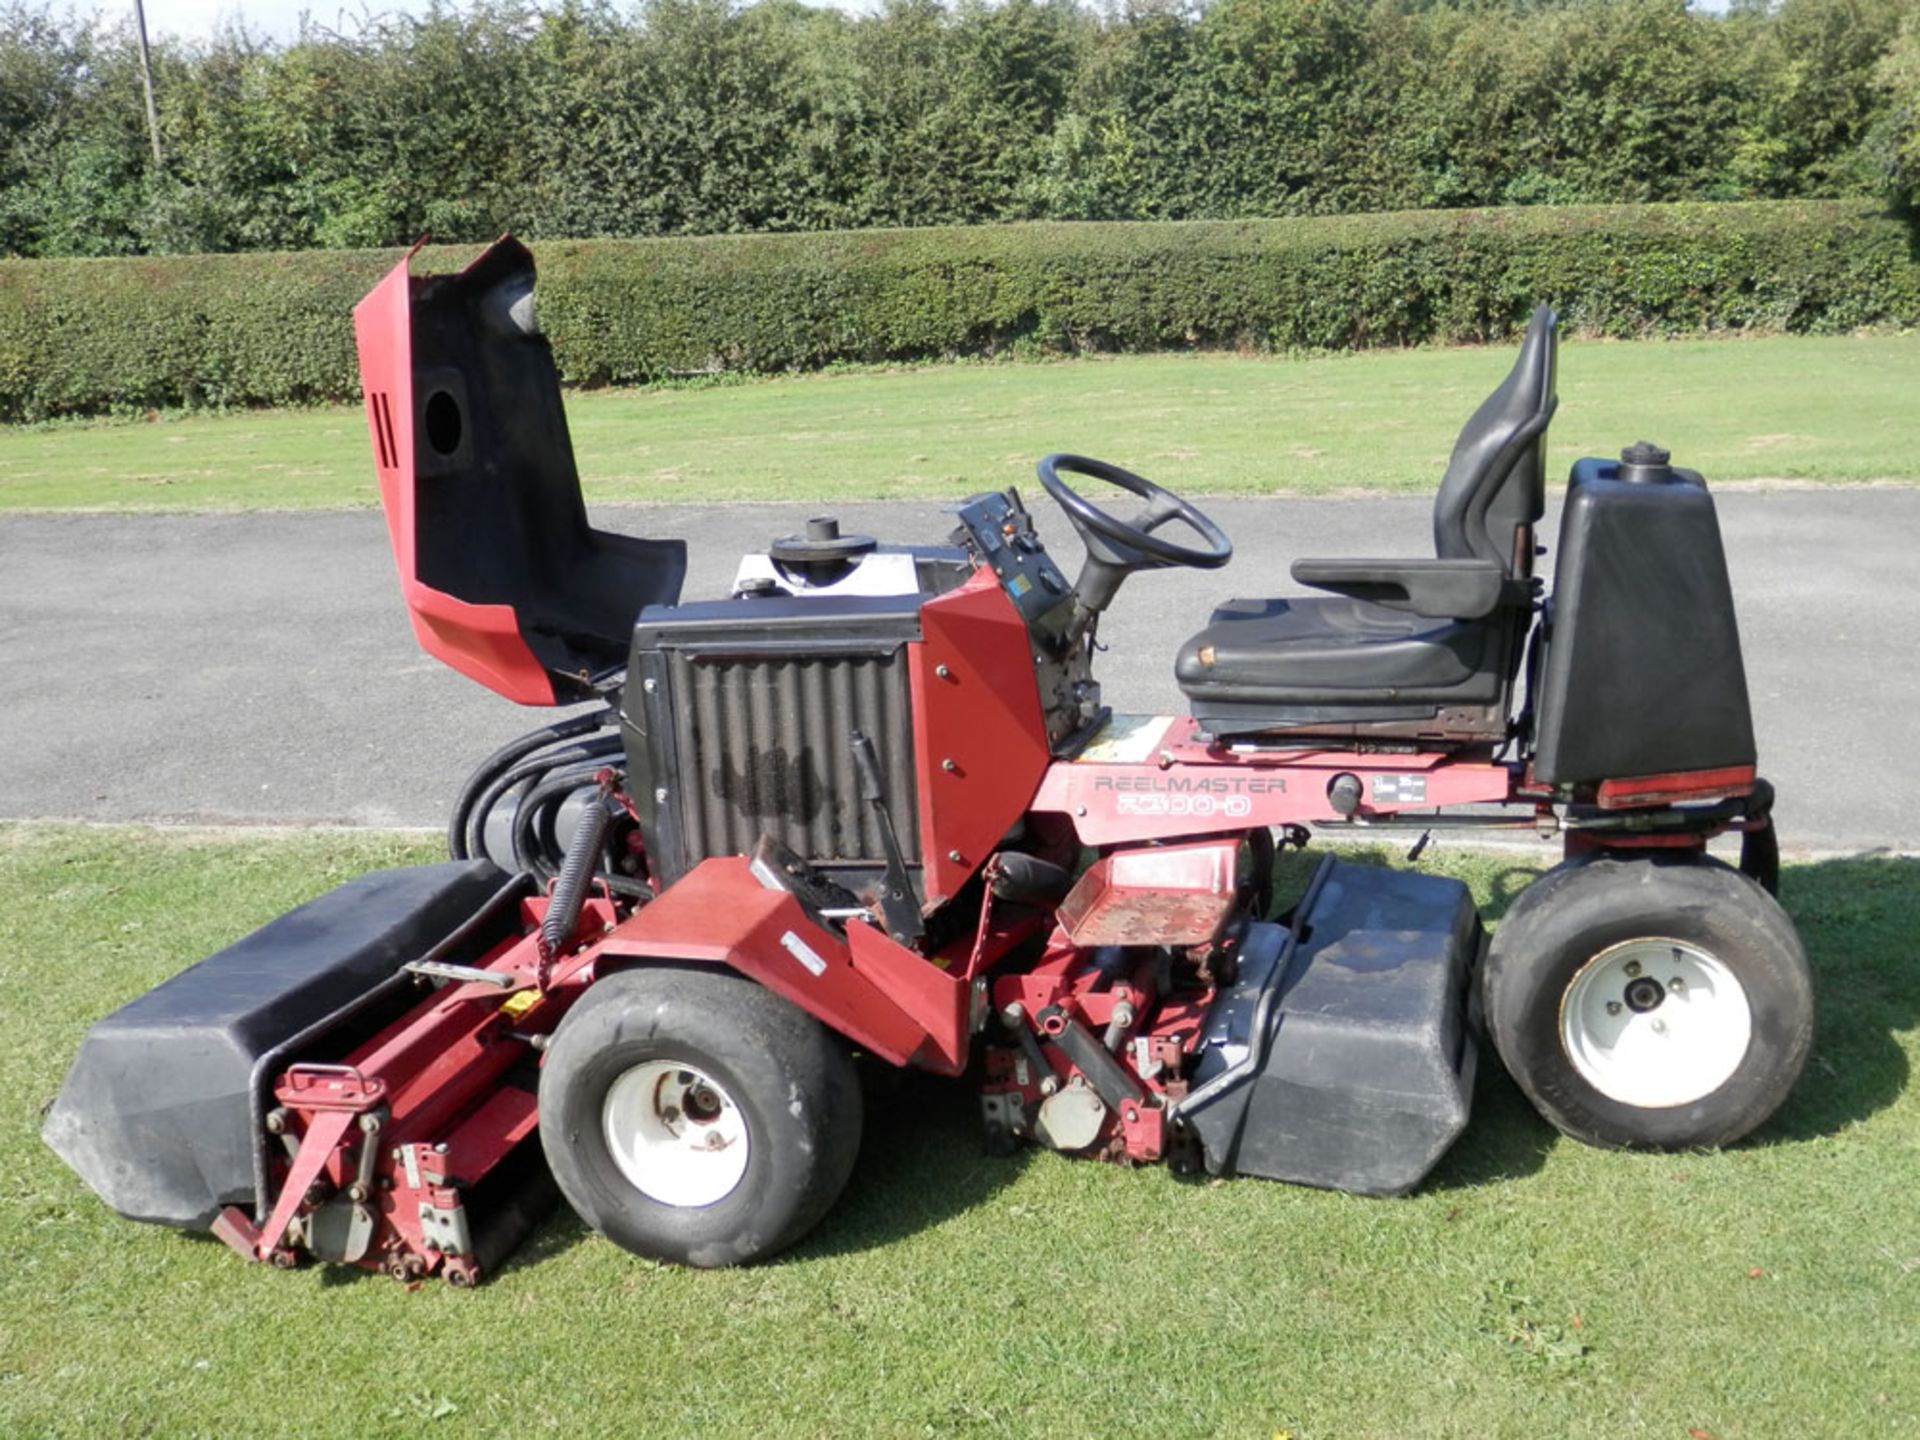 1998 Toro 2300D Ride On Cylinder Mower - Image 7 of 10